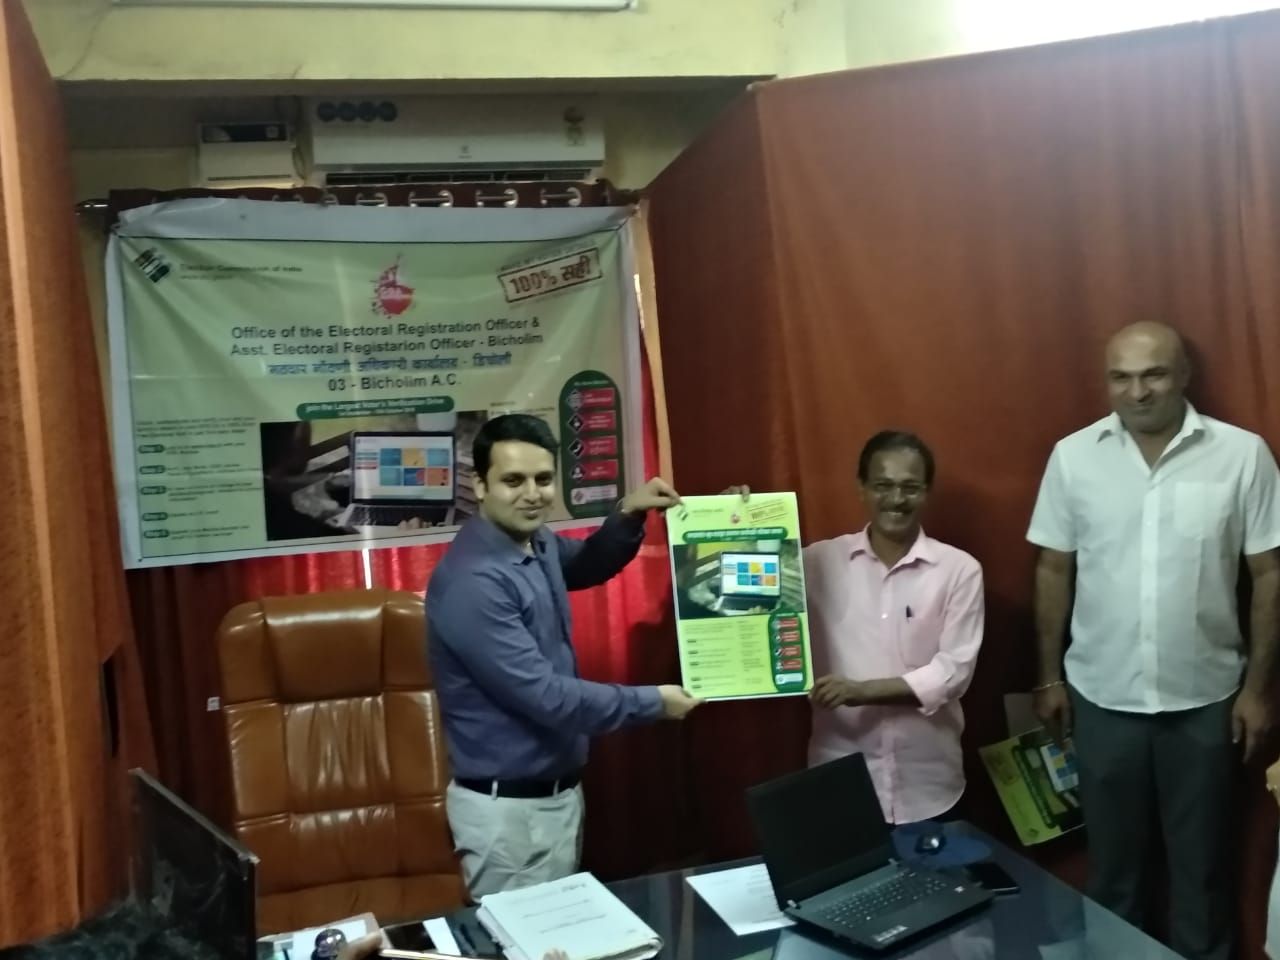 Shri Pravinjay Pandit Mamlatdar of Bicholim Taluka and AERO of 03 Bicholim A.C conducted an Elector Verification Programme on 20.9.2019 for the municipal officials of Sankhali Municipal Council. The AERO disseminated the information in respect of Elector 